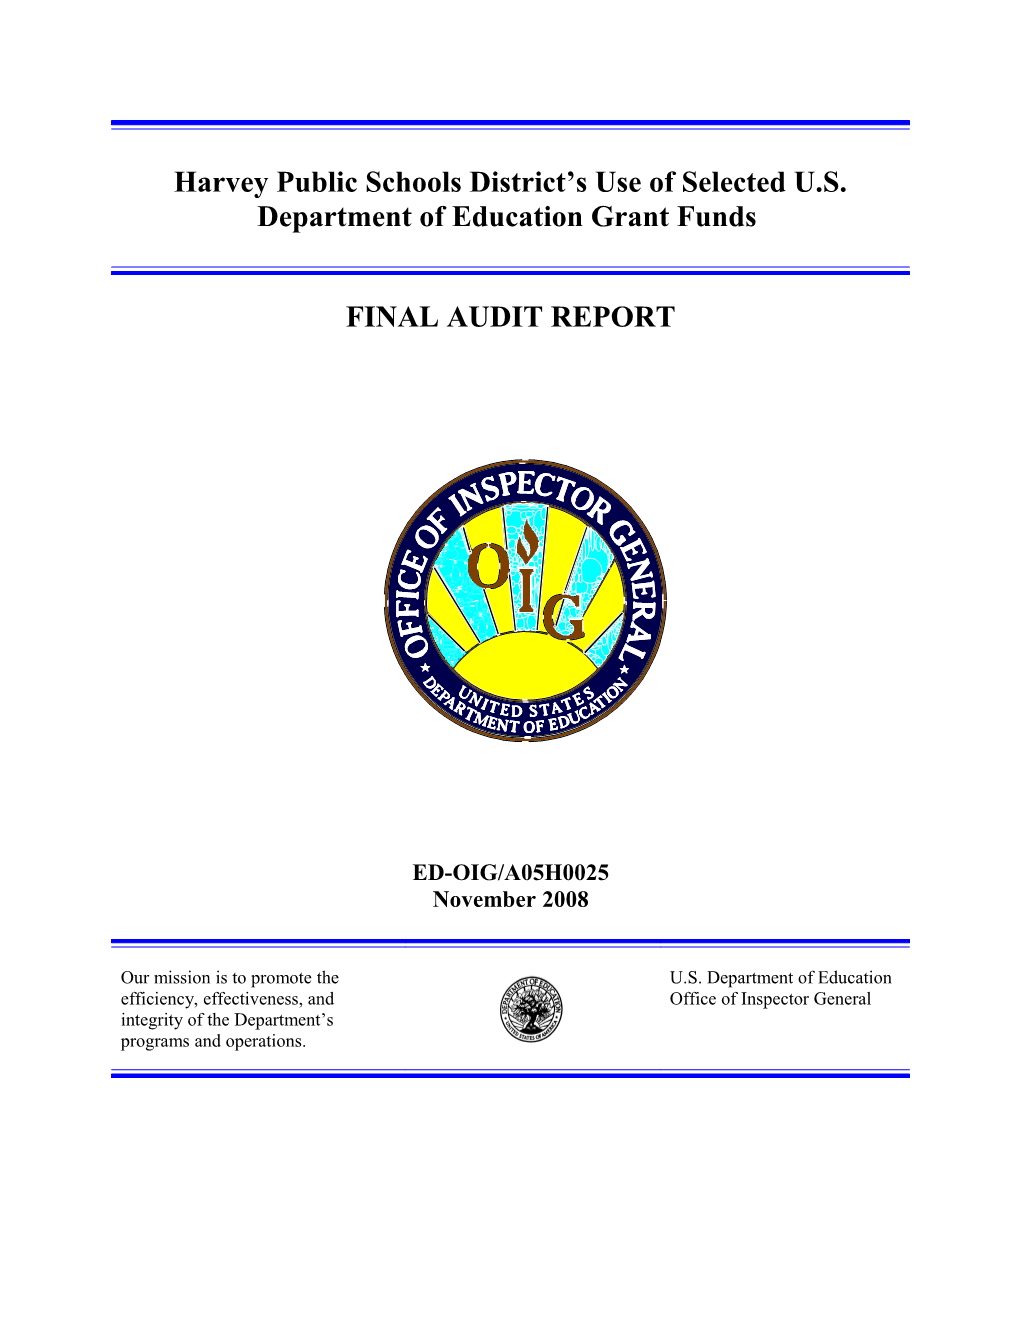 OIG Audit Report: Harvey Public Schools District S Use of Selected U.S. Department of Education